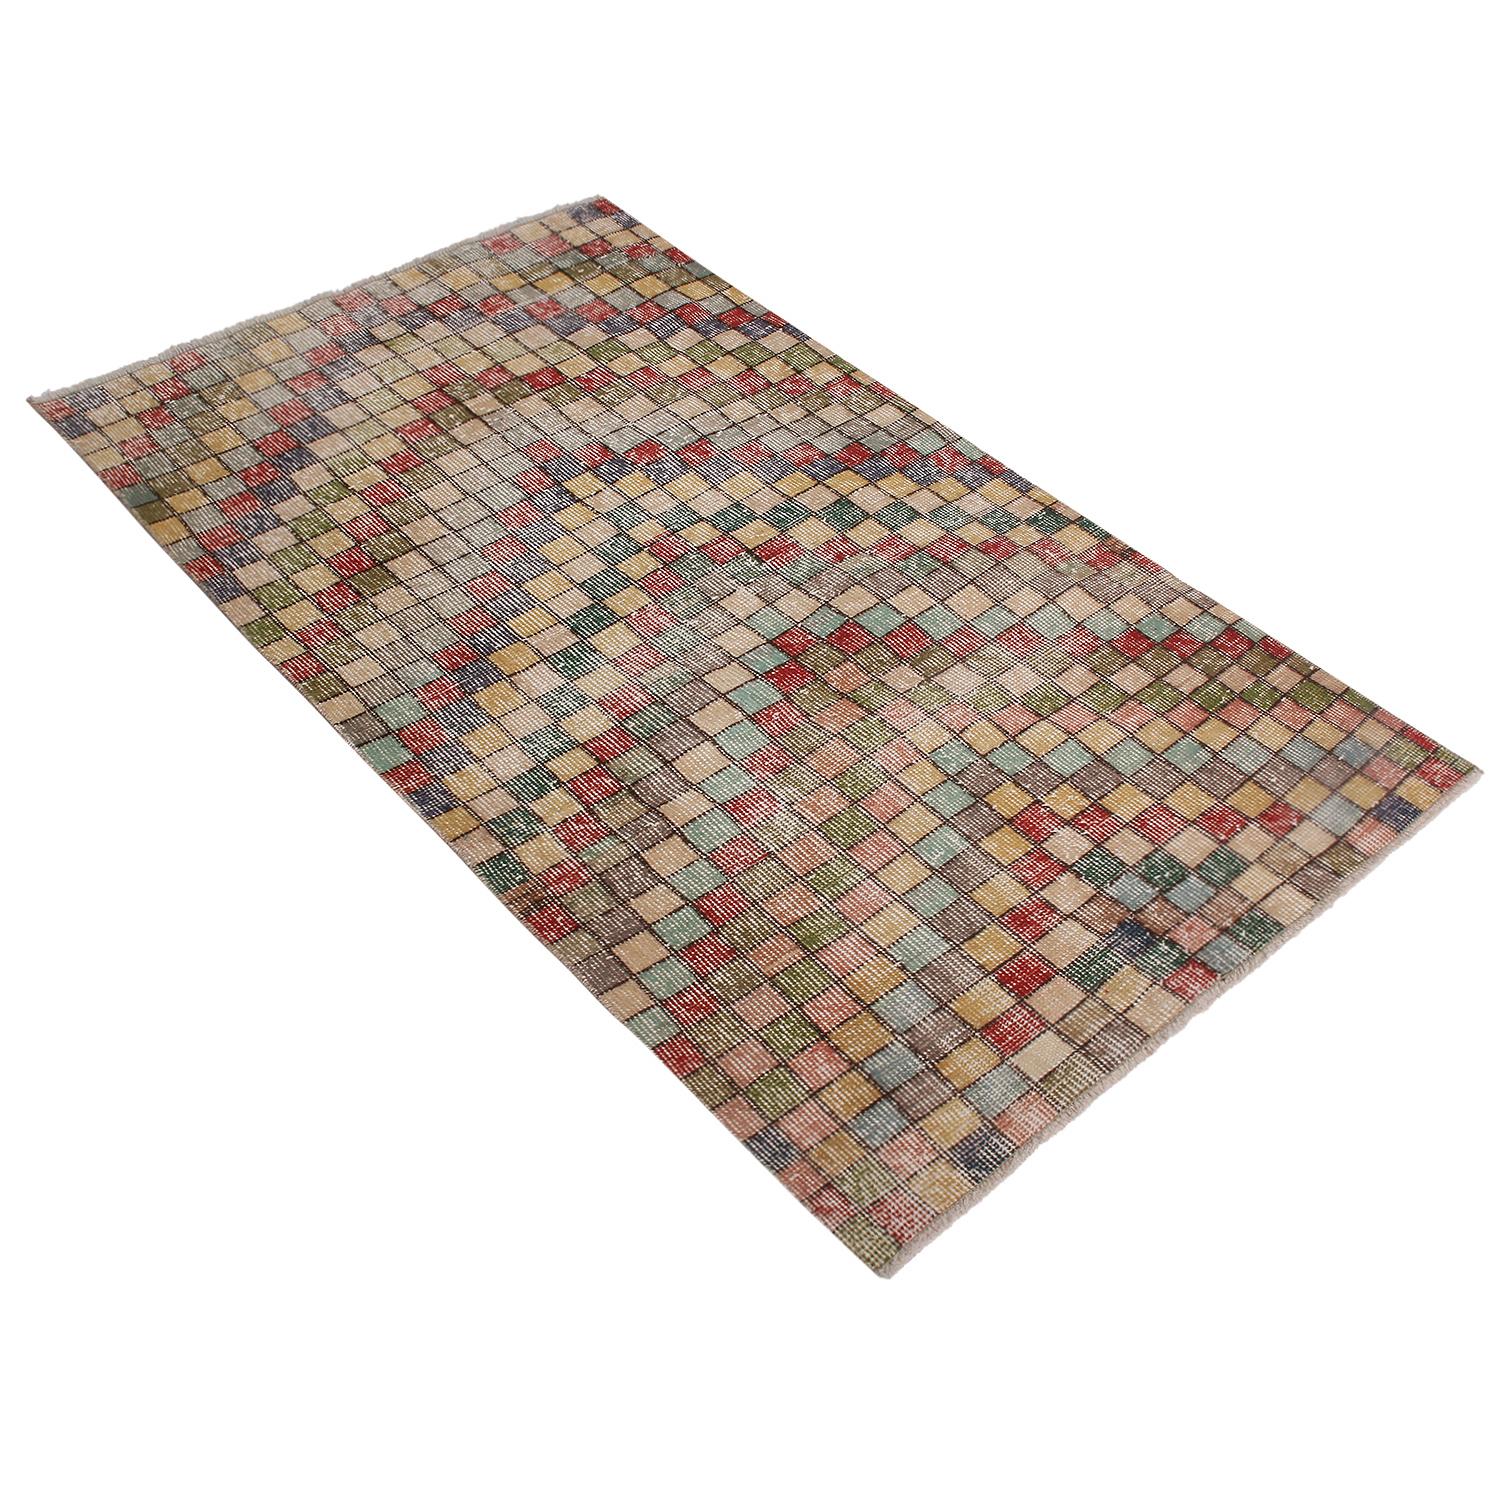 Hand knotted in Turkey originating between 1960-1970, this vintage mid-century runner joins Rug & Kilim’s midcentury Pasha collection celebrating Turkish icon Zeki Müren with Josh’s hand picked favorites from this period. This piece is one of the